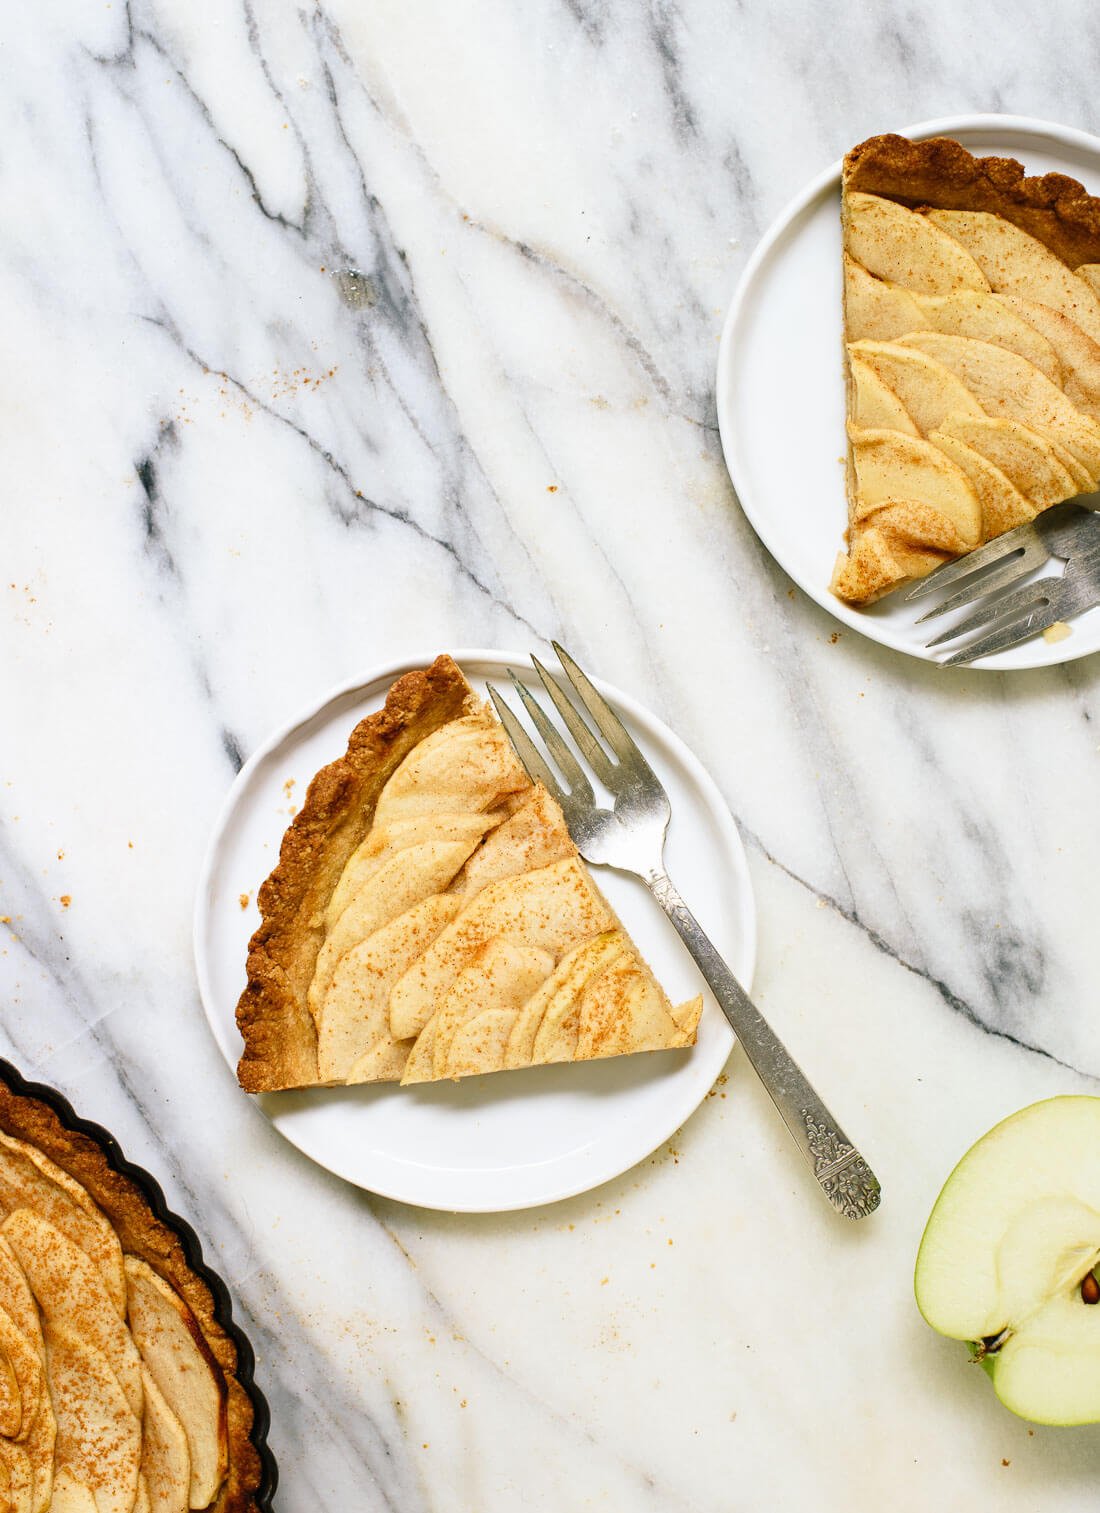 This delicious apple tart features an easy crust made with almond and oat flour. It's fool-proof! cookieandkate.com